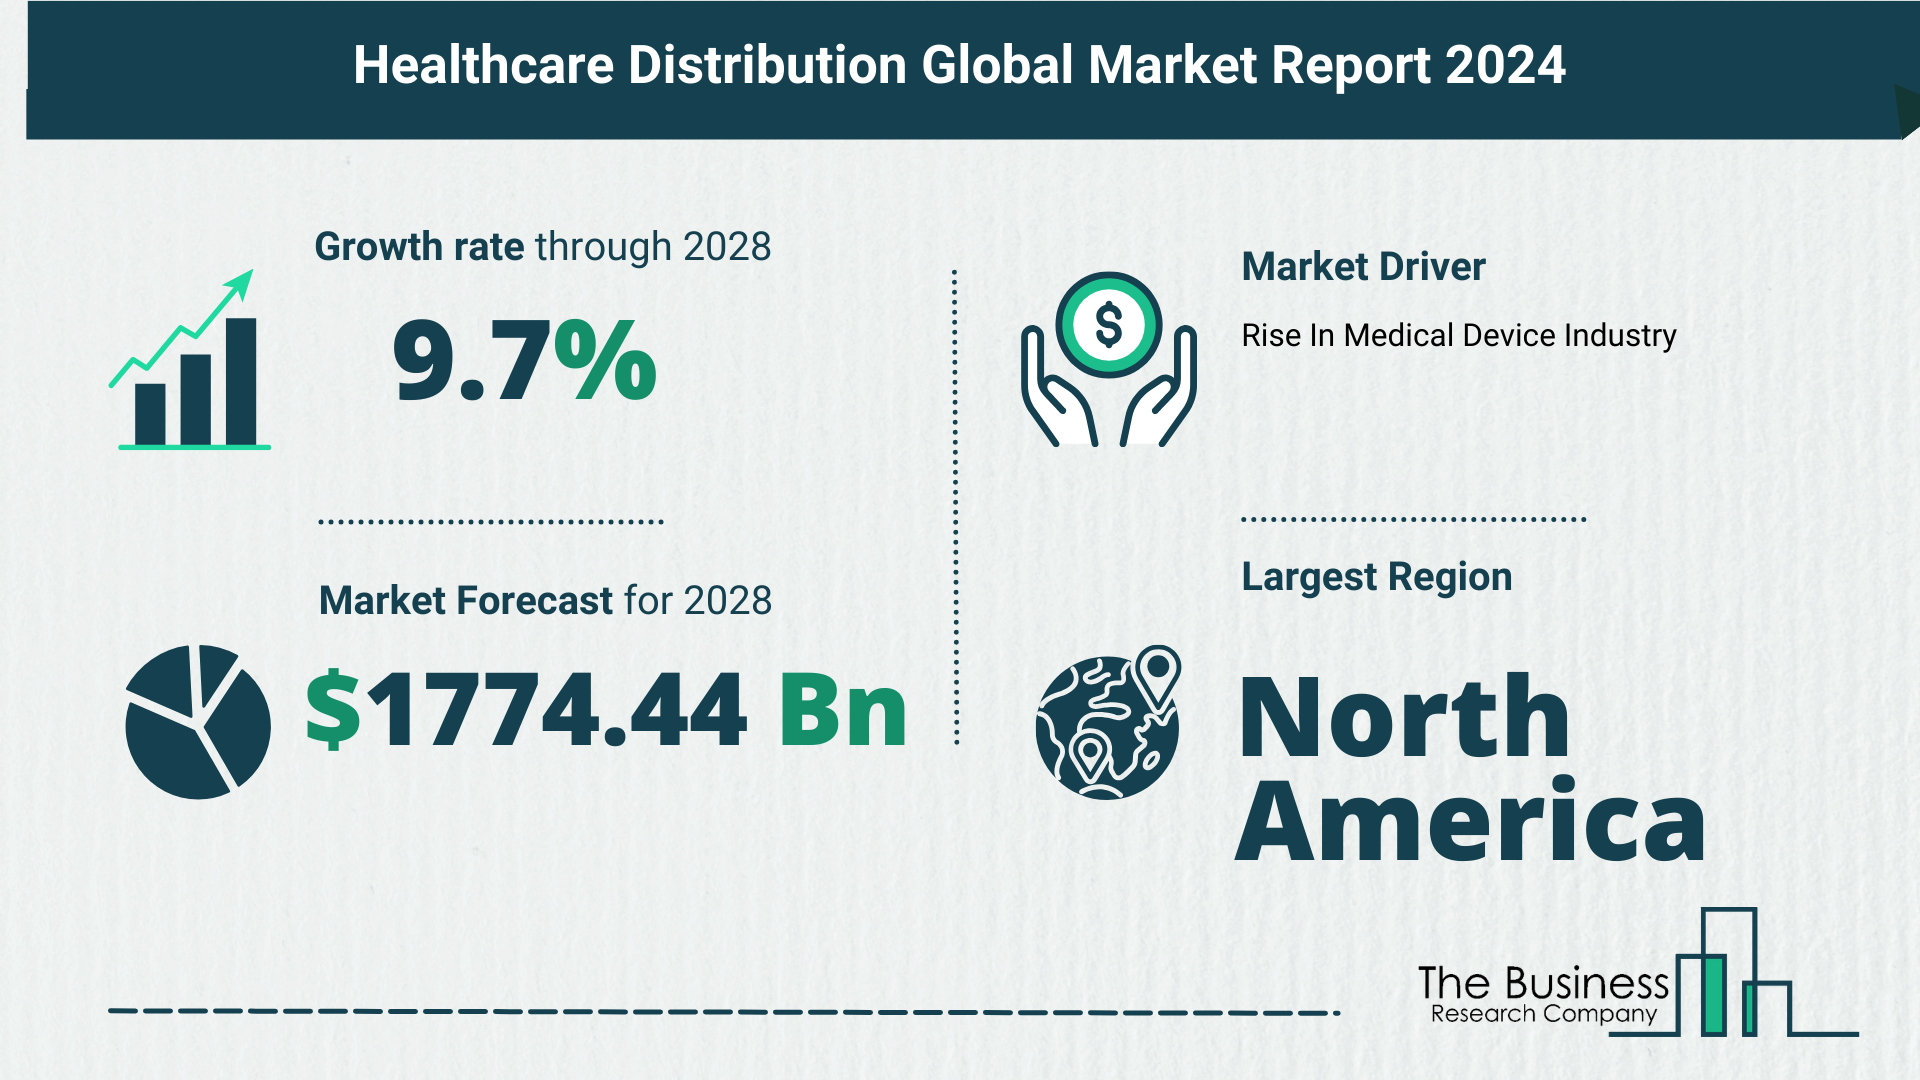 Key Trends And Drivers In The Healthcare Distribution Market 2024